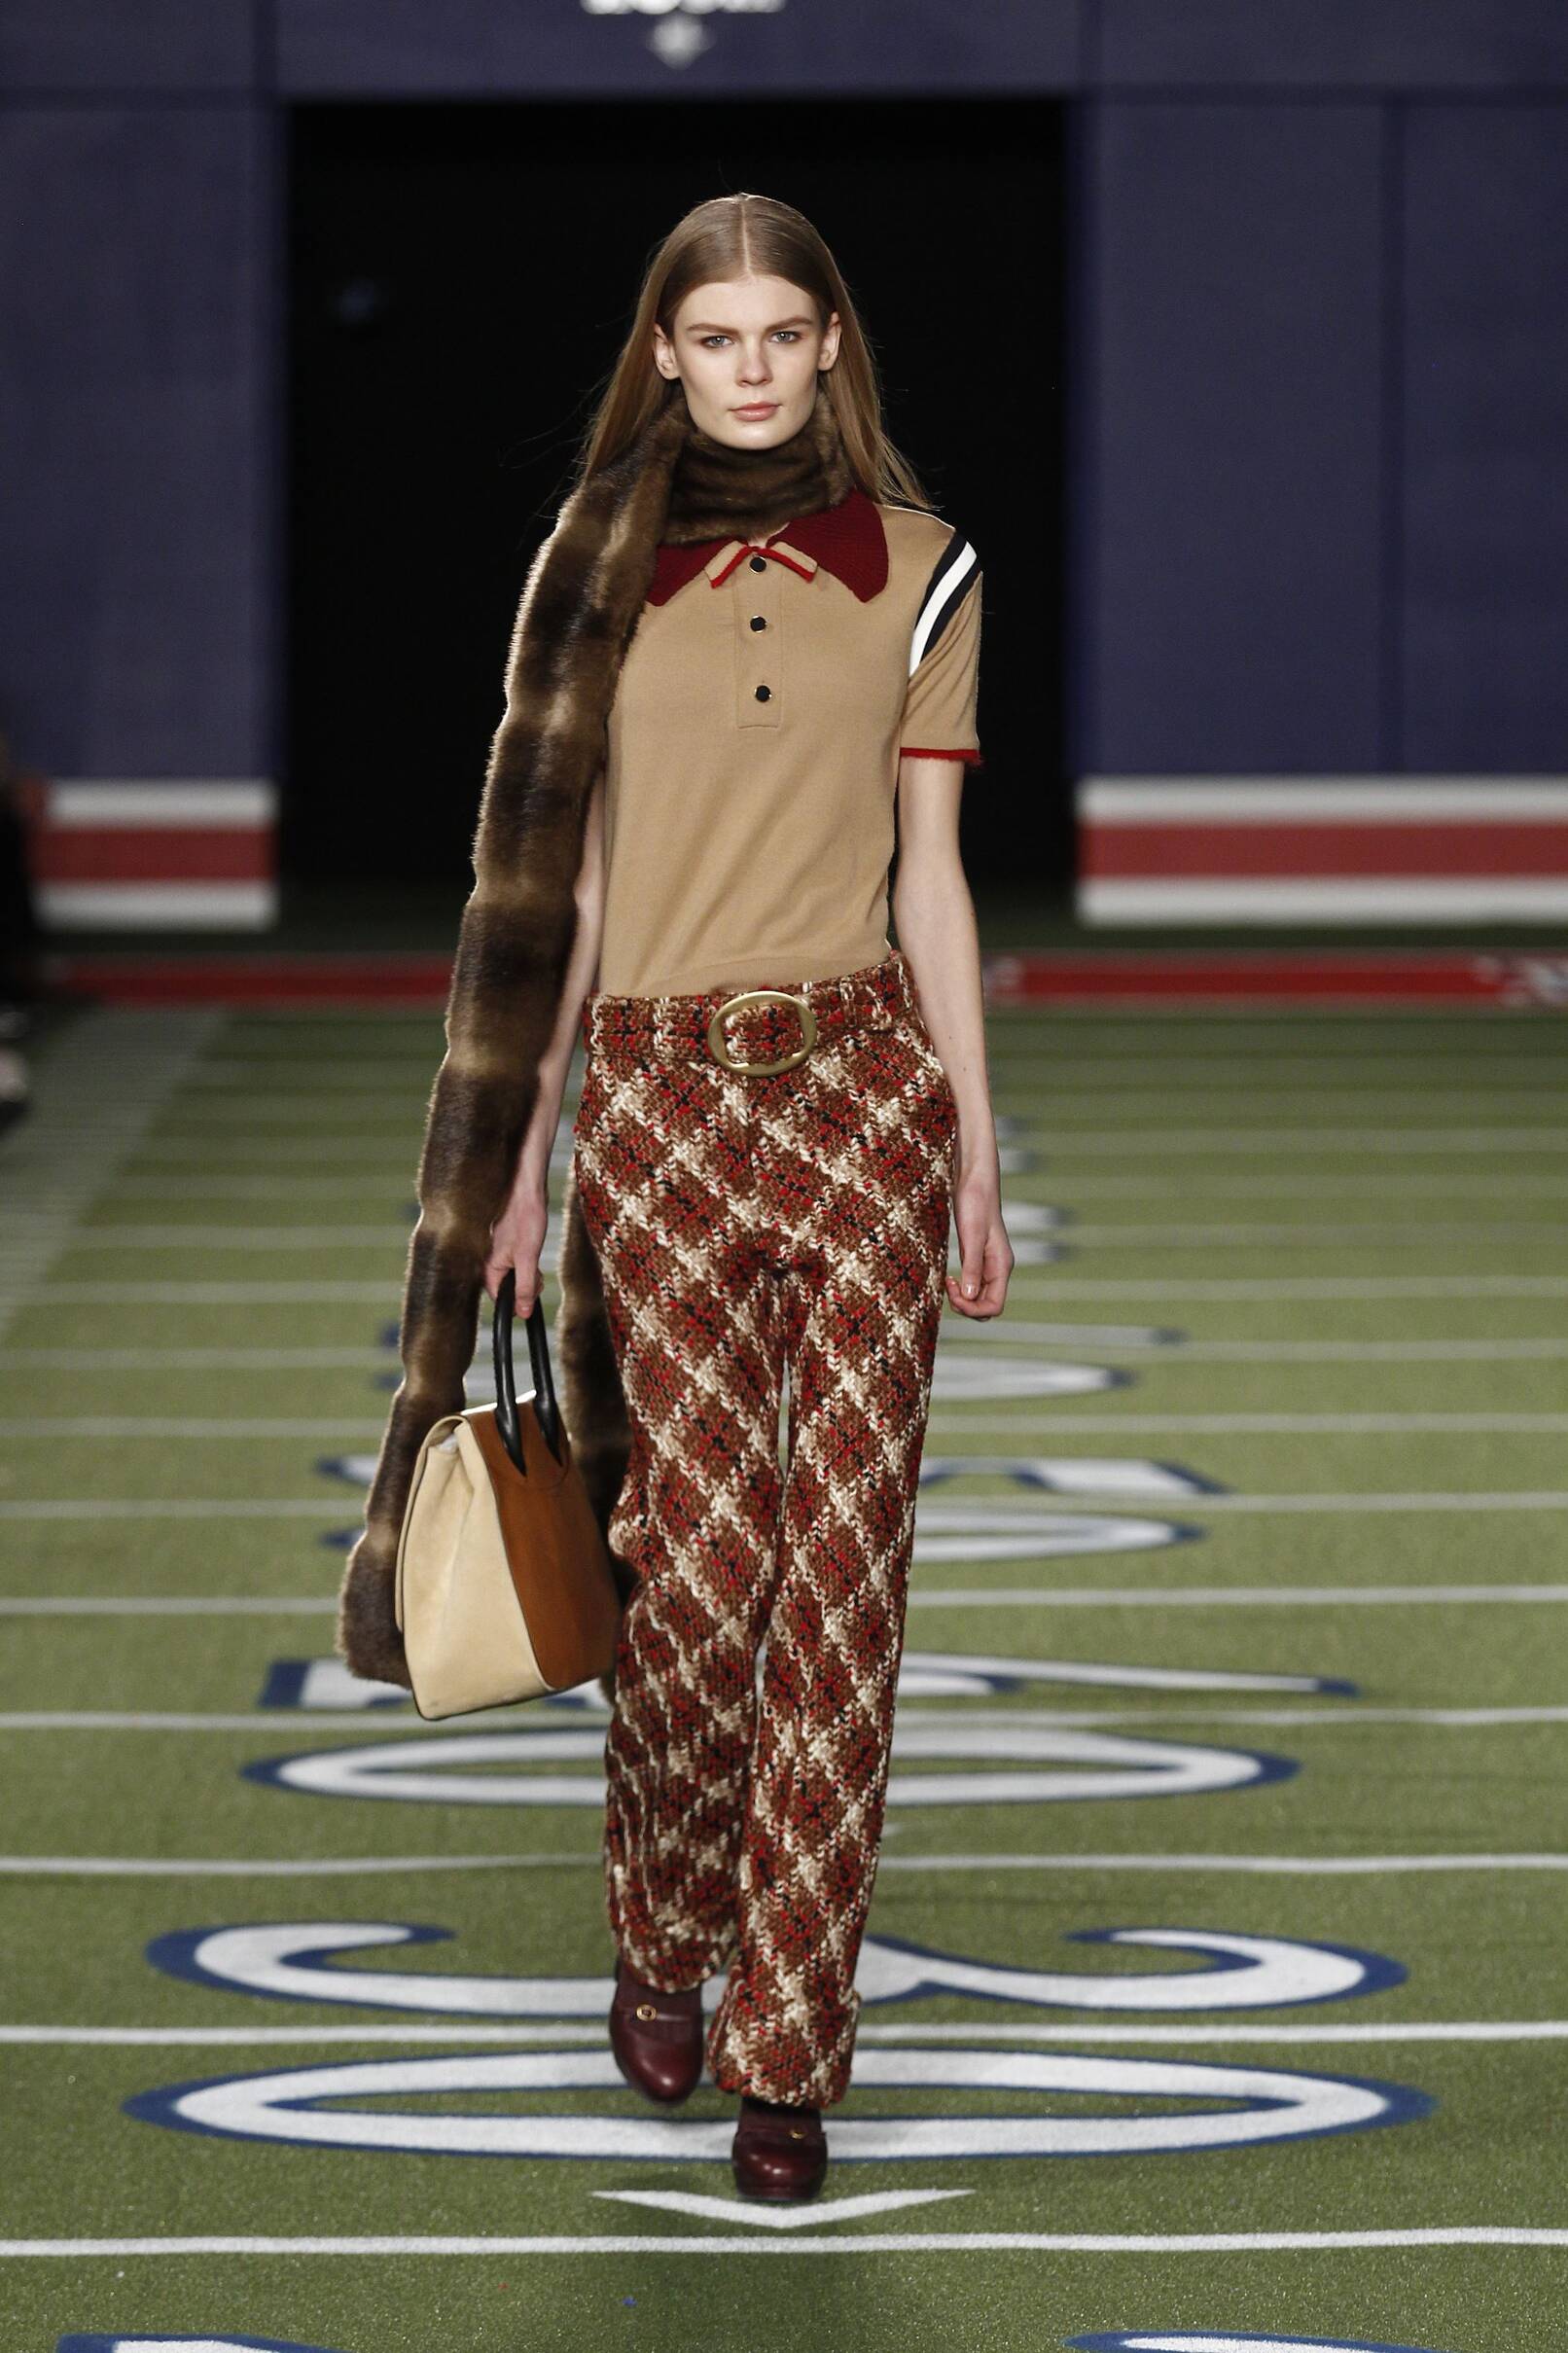 TOMMY HILFIGER FALL WINTER 2015-16 WOMEN’S COLLECTION  